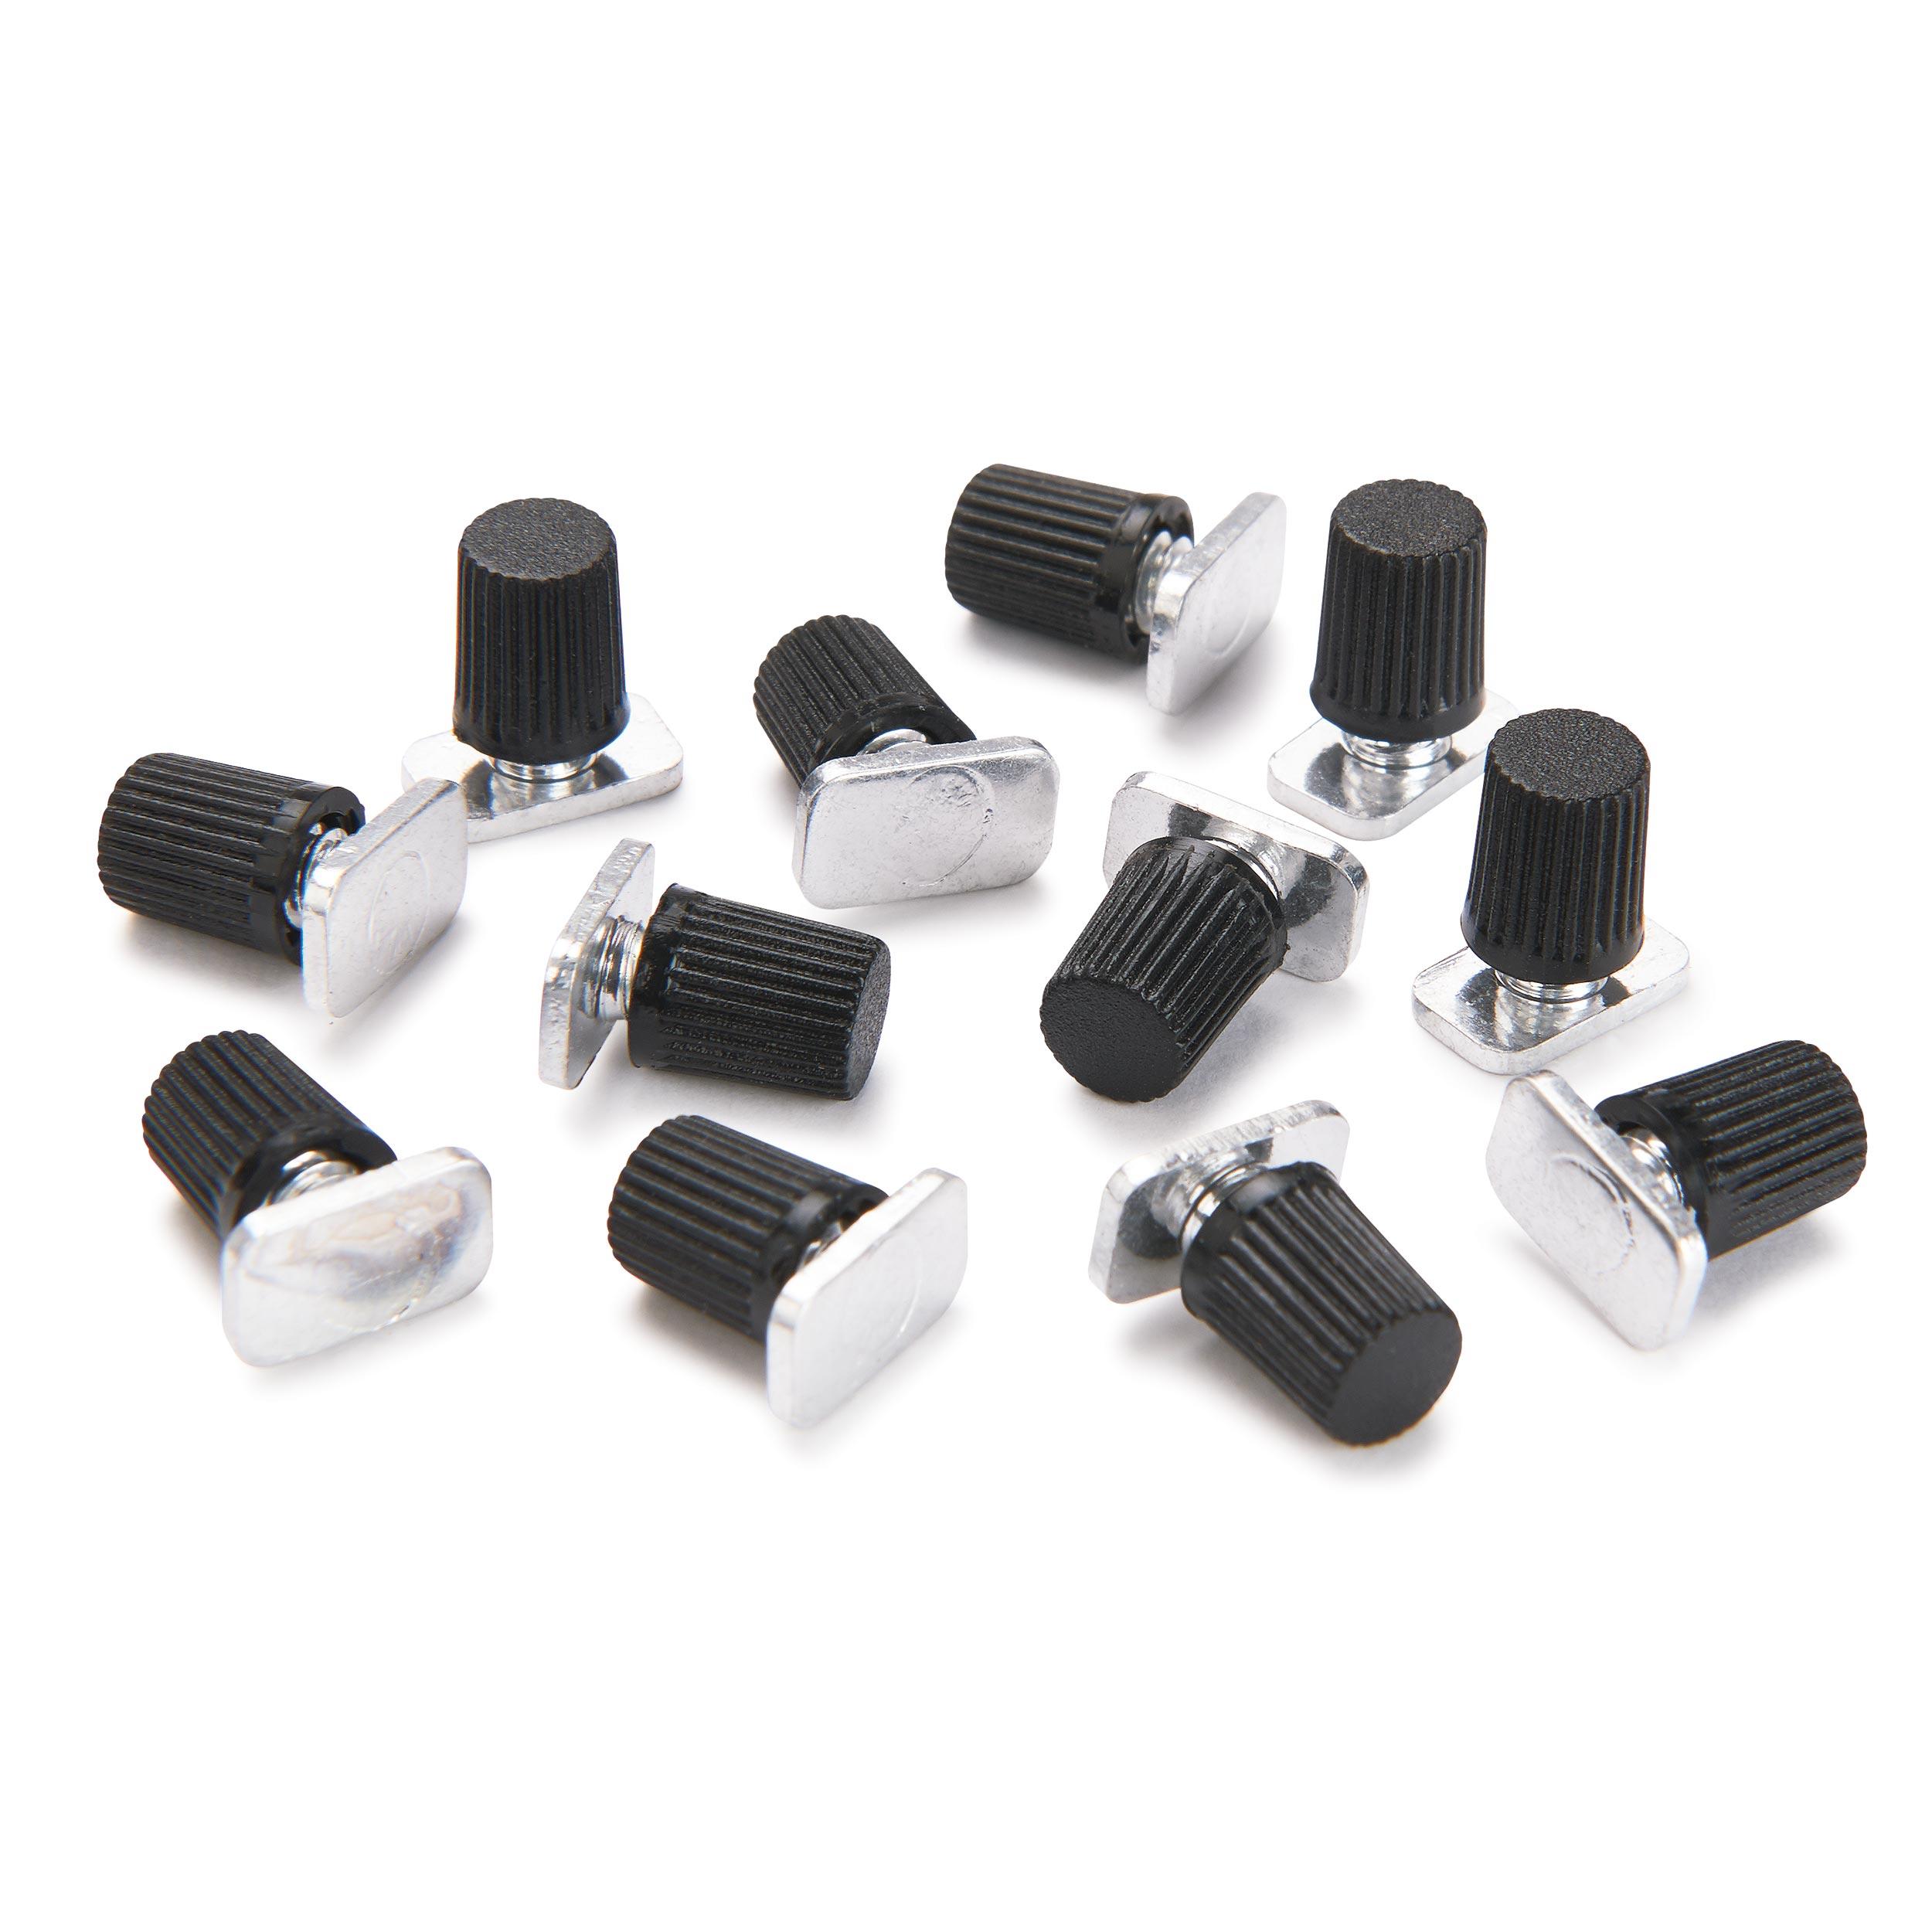 1/4" Studs For Magnetic Pen Bushing Storage Panel 12-pc